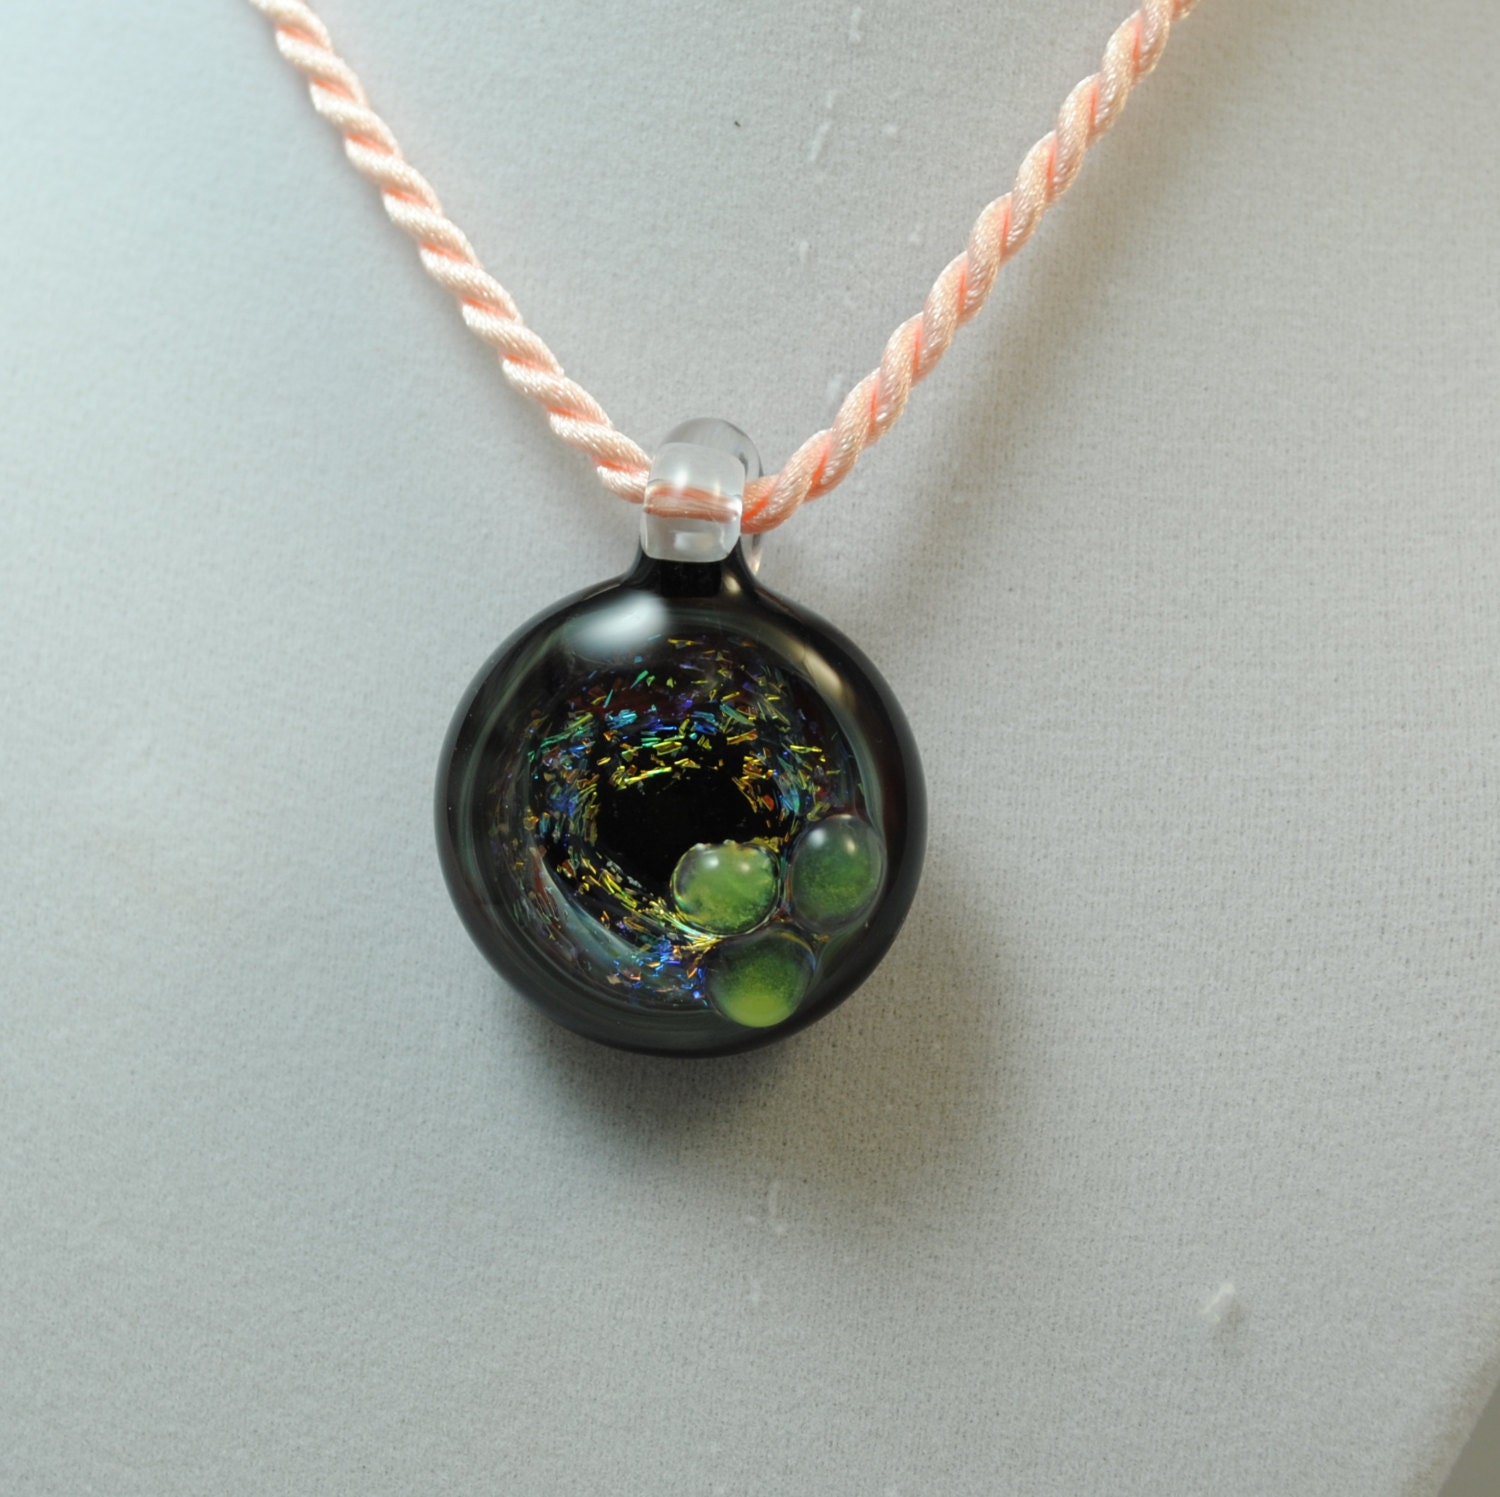 Dichroic Pendant with Slime dots by One Hand Jeramy by EWGG